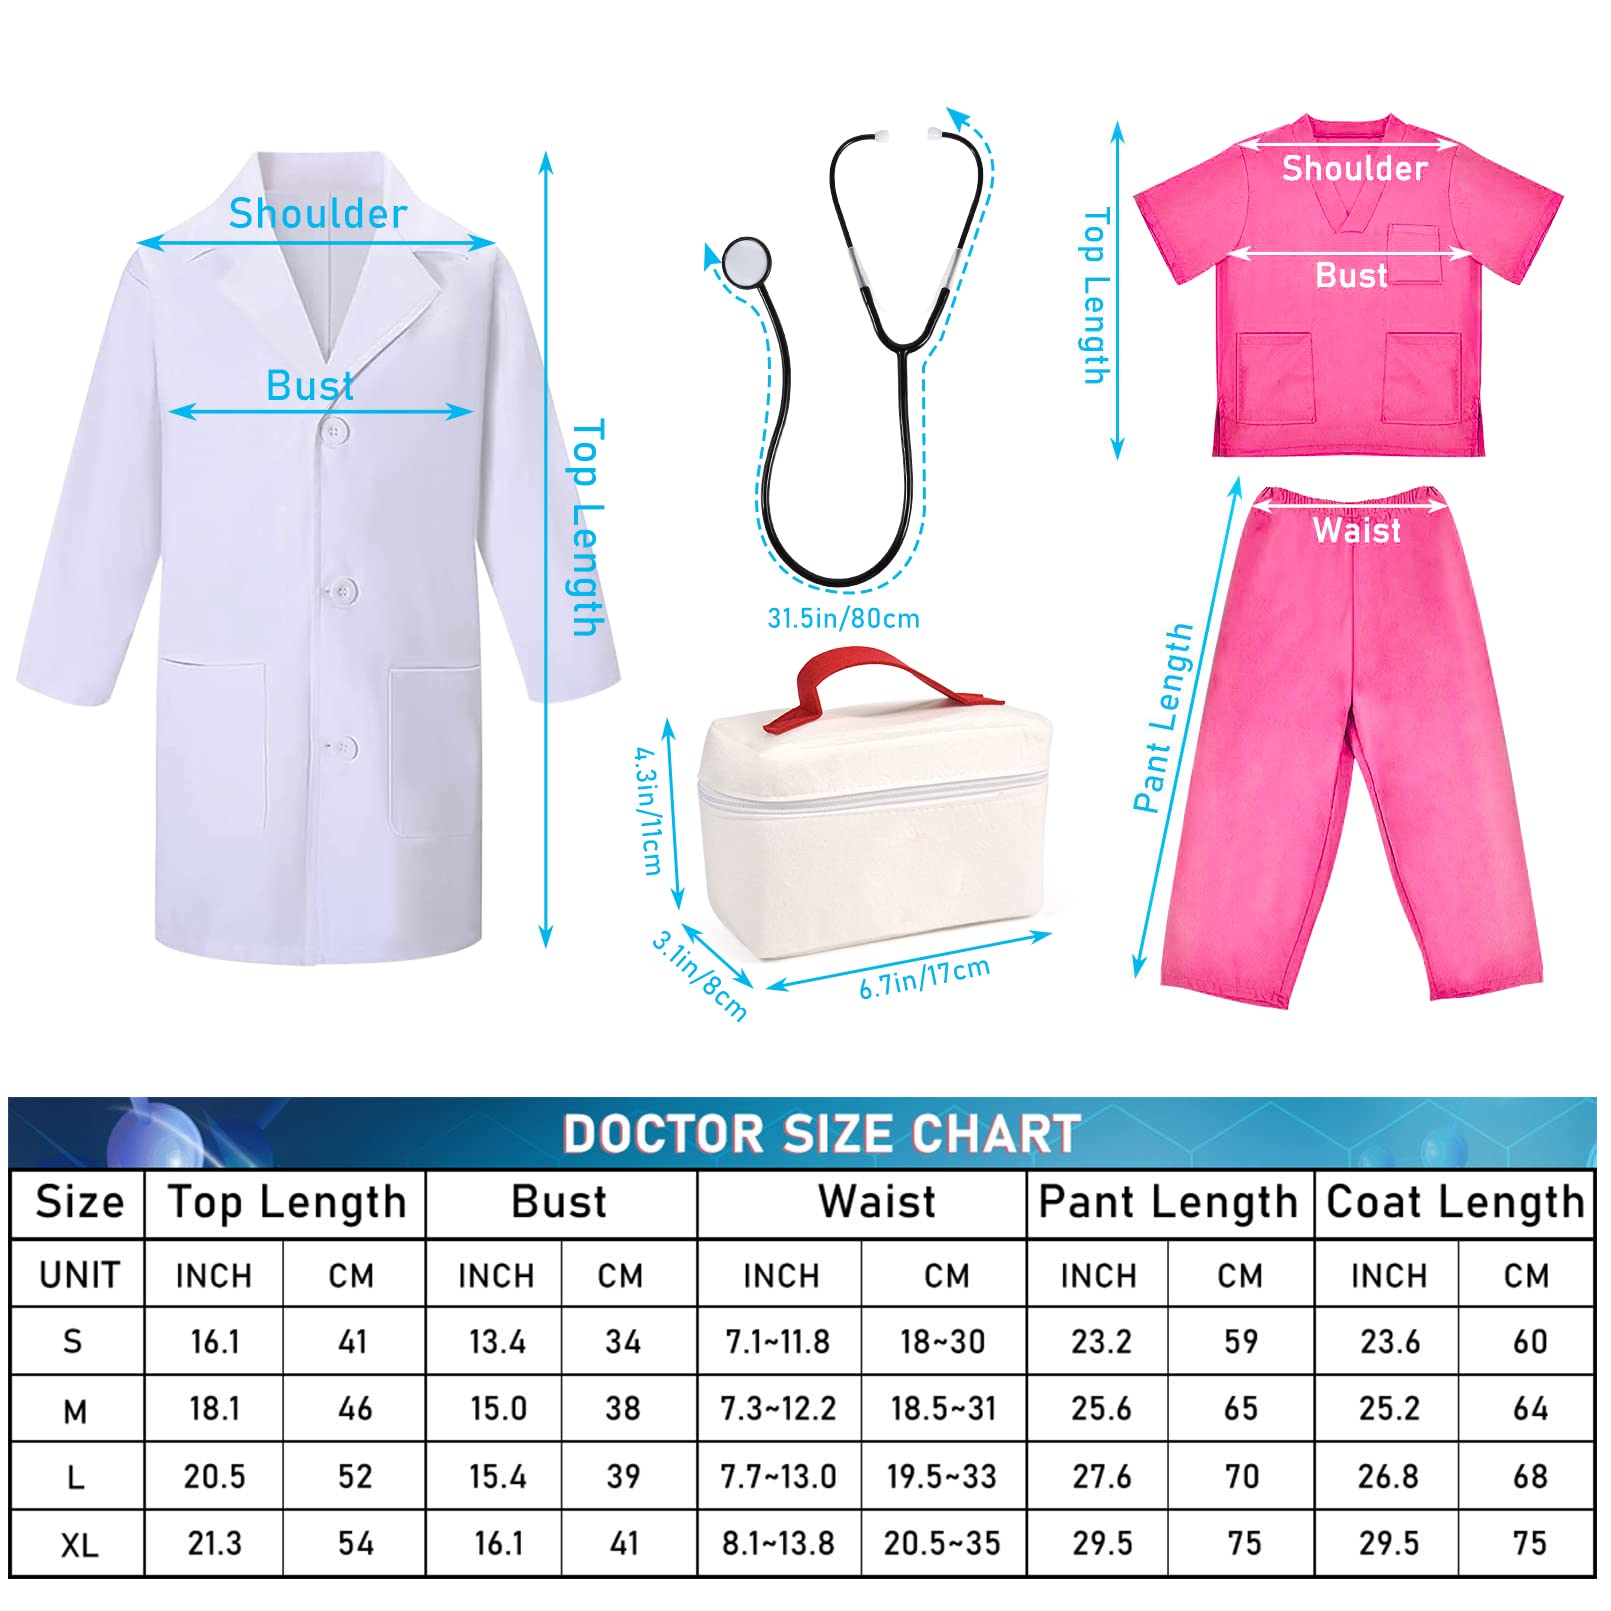 Toylink Kids Doctor Costume Pretend Play Kit with Lab Coat Carrying Bag Accessories Halloween Doctor Dress up for Boys Girls